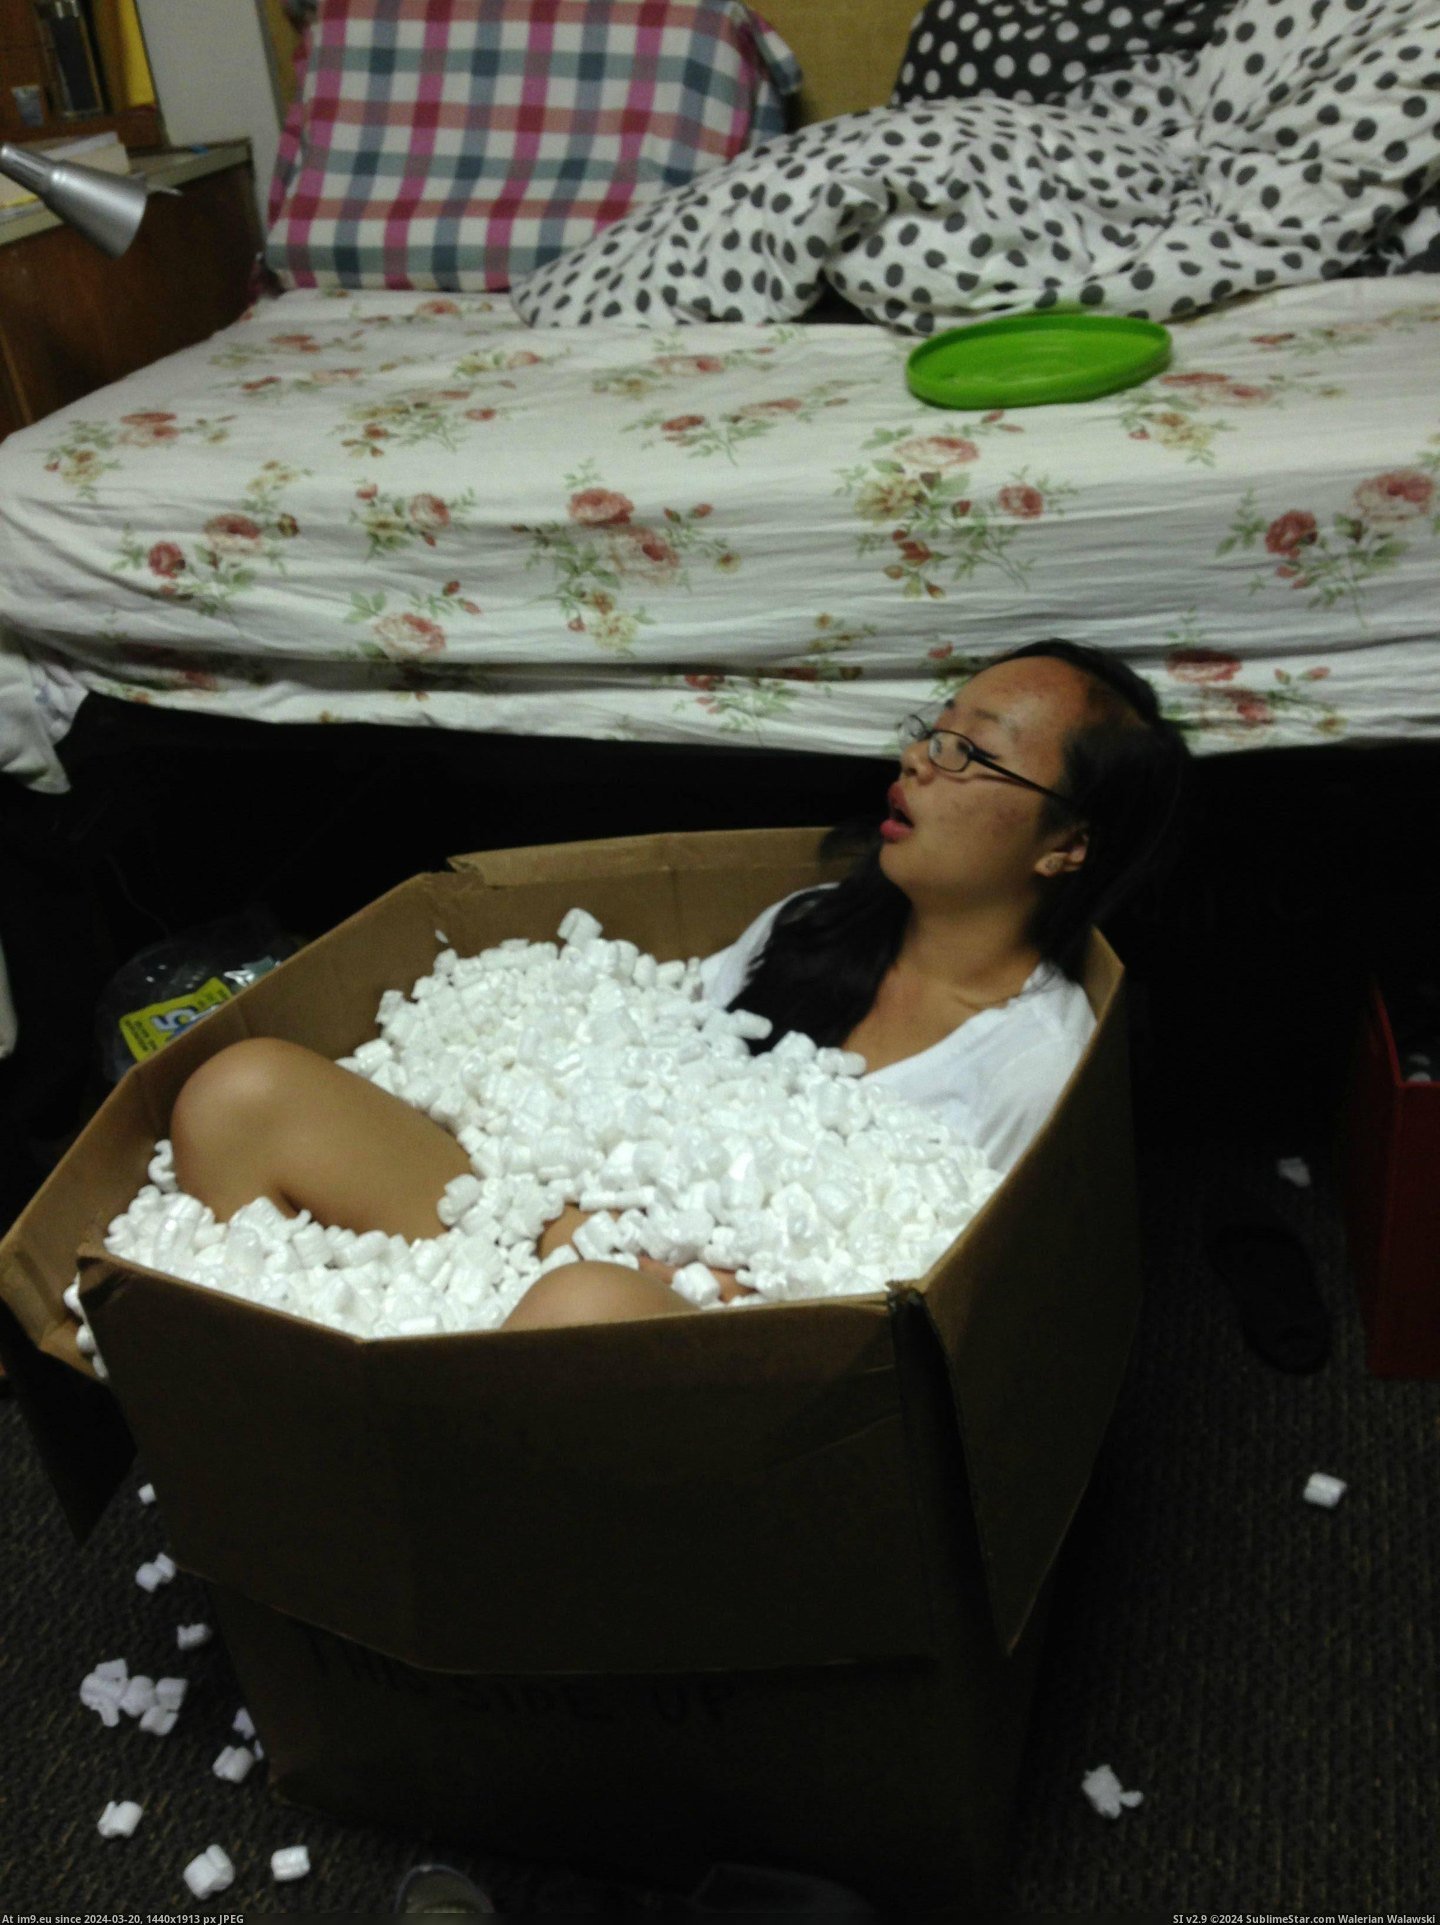 #Box #Find #Roommate #2am #Peanuts #Wake #Passed #Packing [Pics] I wake up at 2am to find my roommate passed out in a box of packing peanuts. Pic. (Image of album My r/PICS favs))